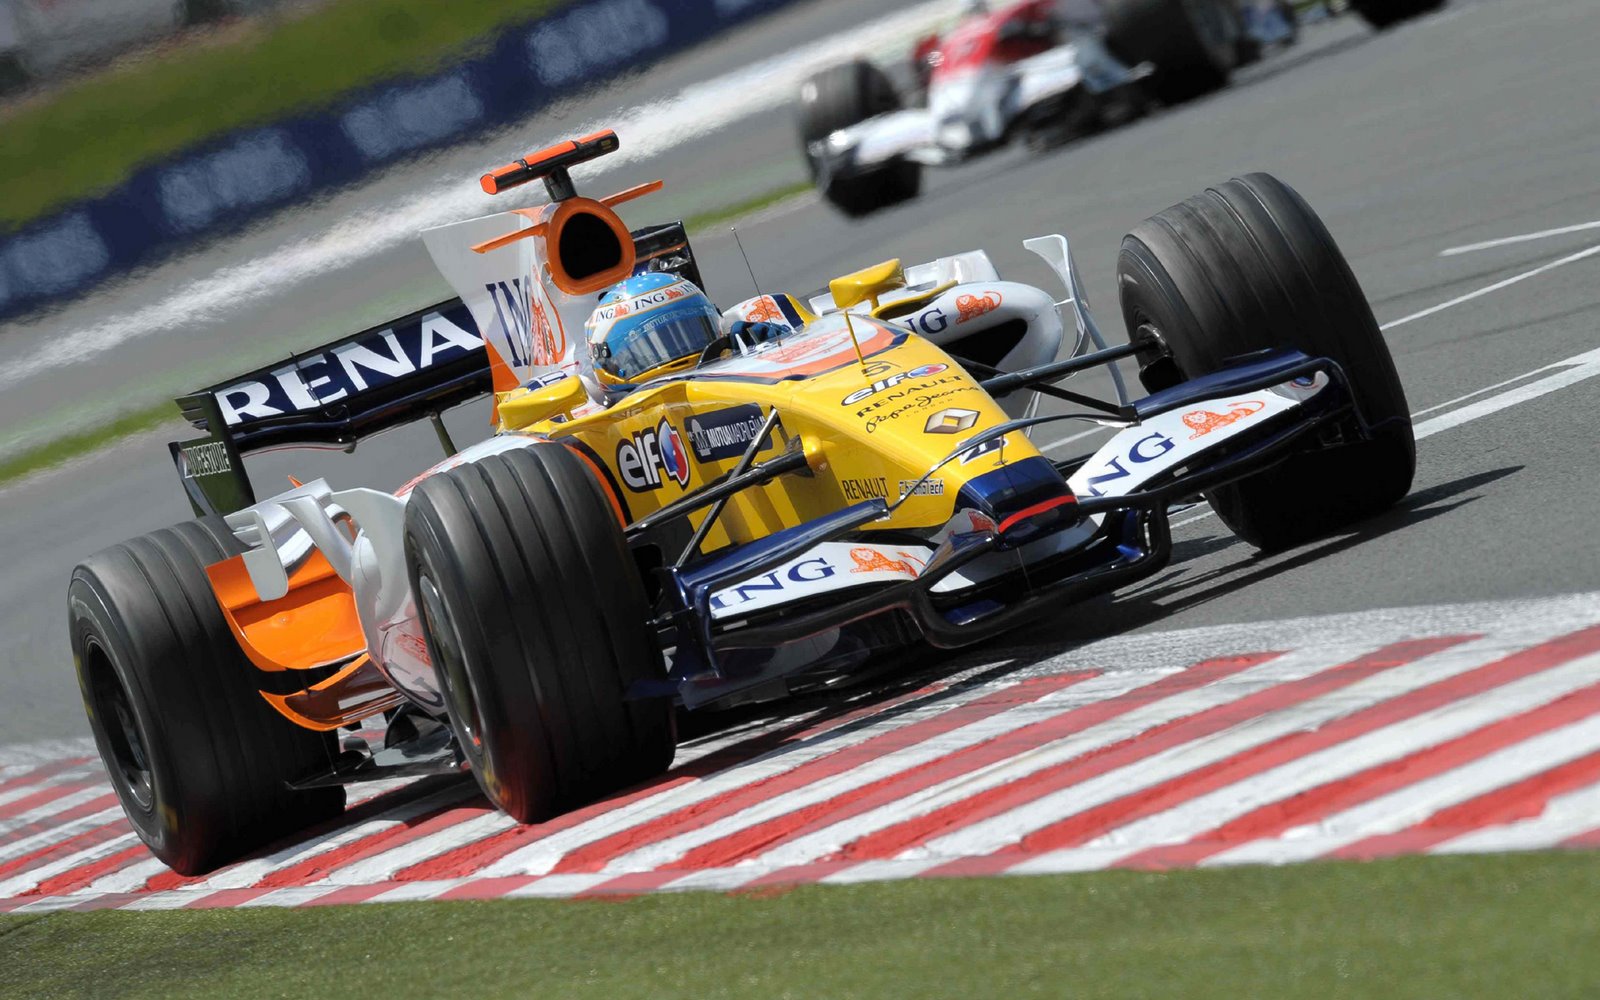 [Fernando+Alonso+Renault+Friday+Free+Practise+France+Magny+Cours+3.jpg]